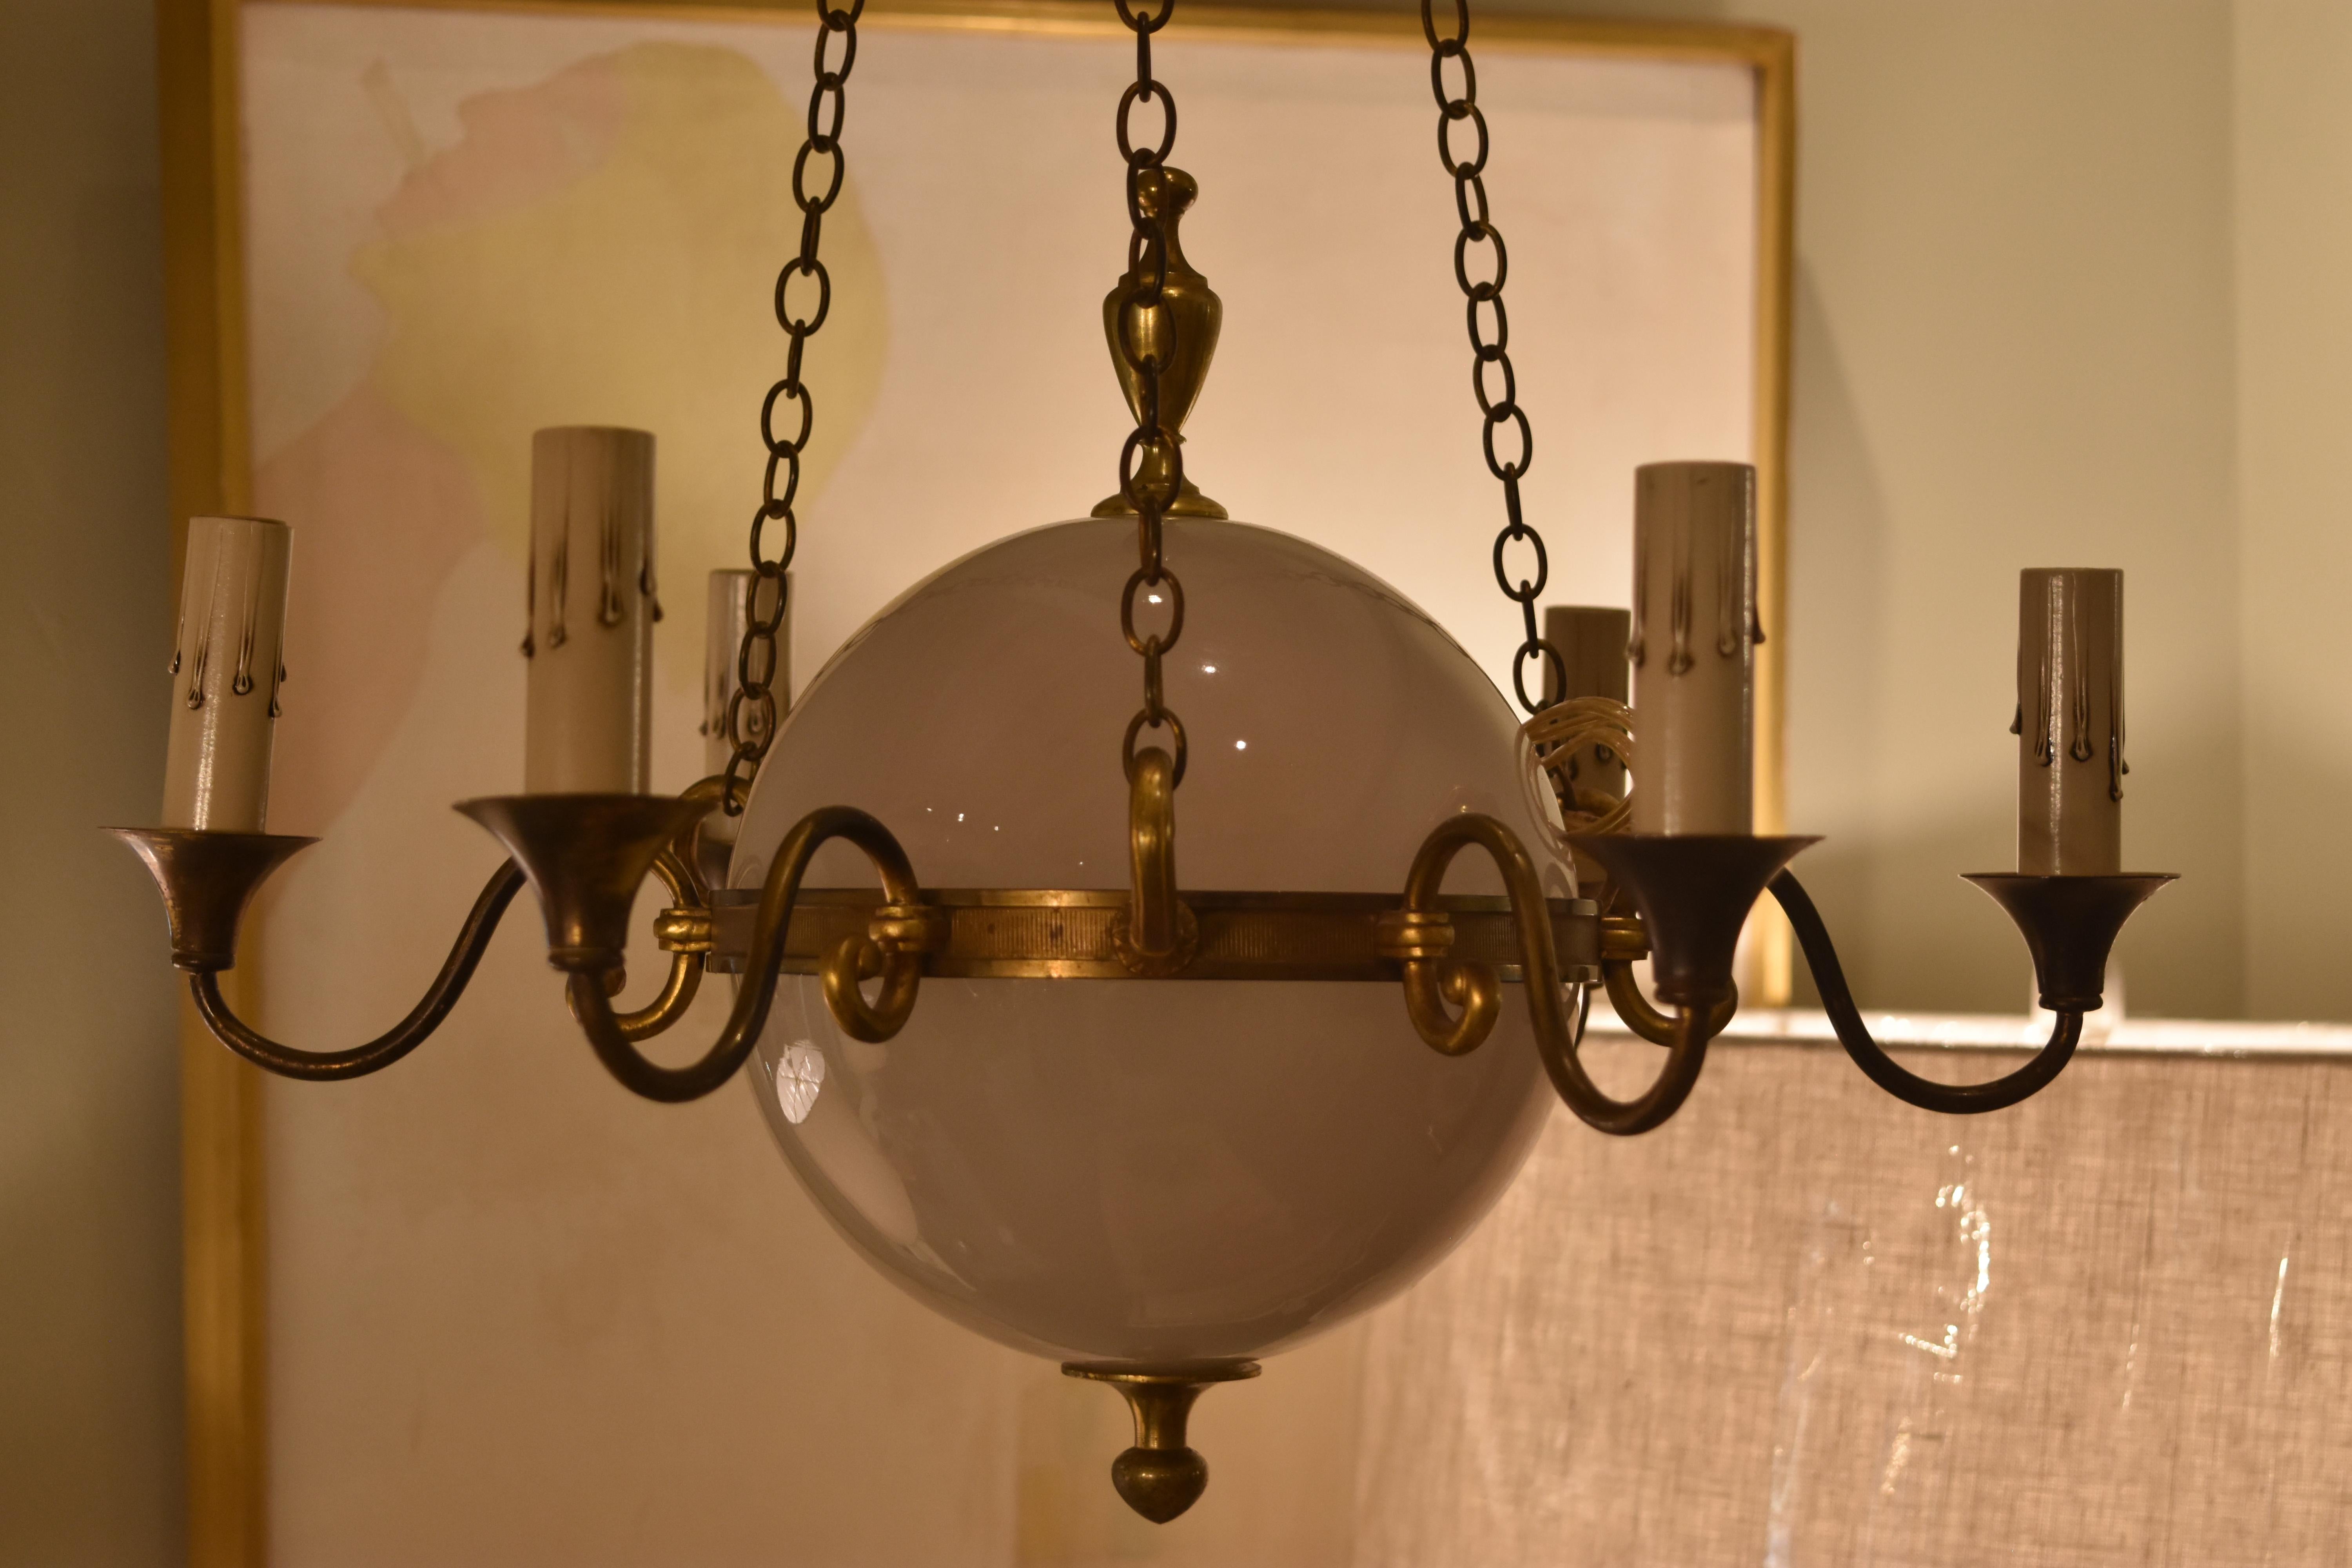 This small vintage French six-arm chandelier features a white glass globe surrounded by six scrolling arms and hanging from three chains. It has been newly rewired for American use.